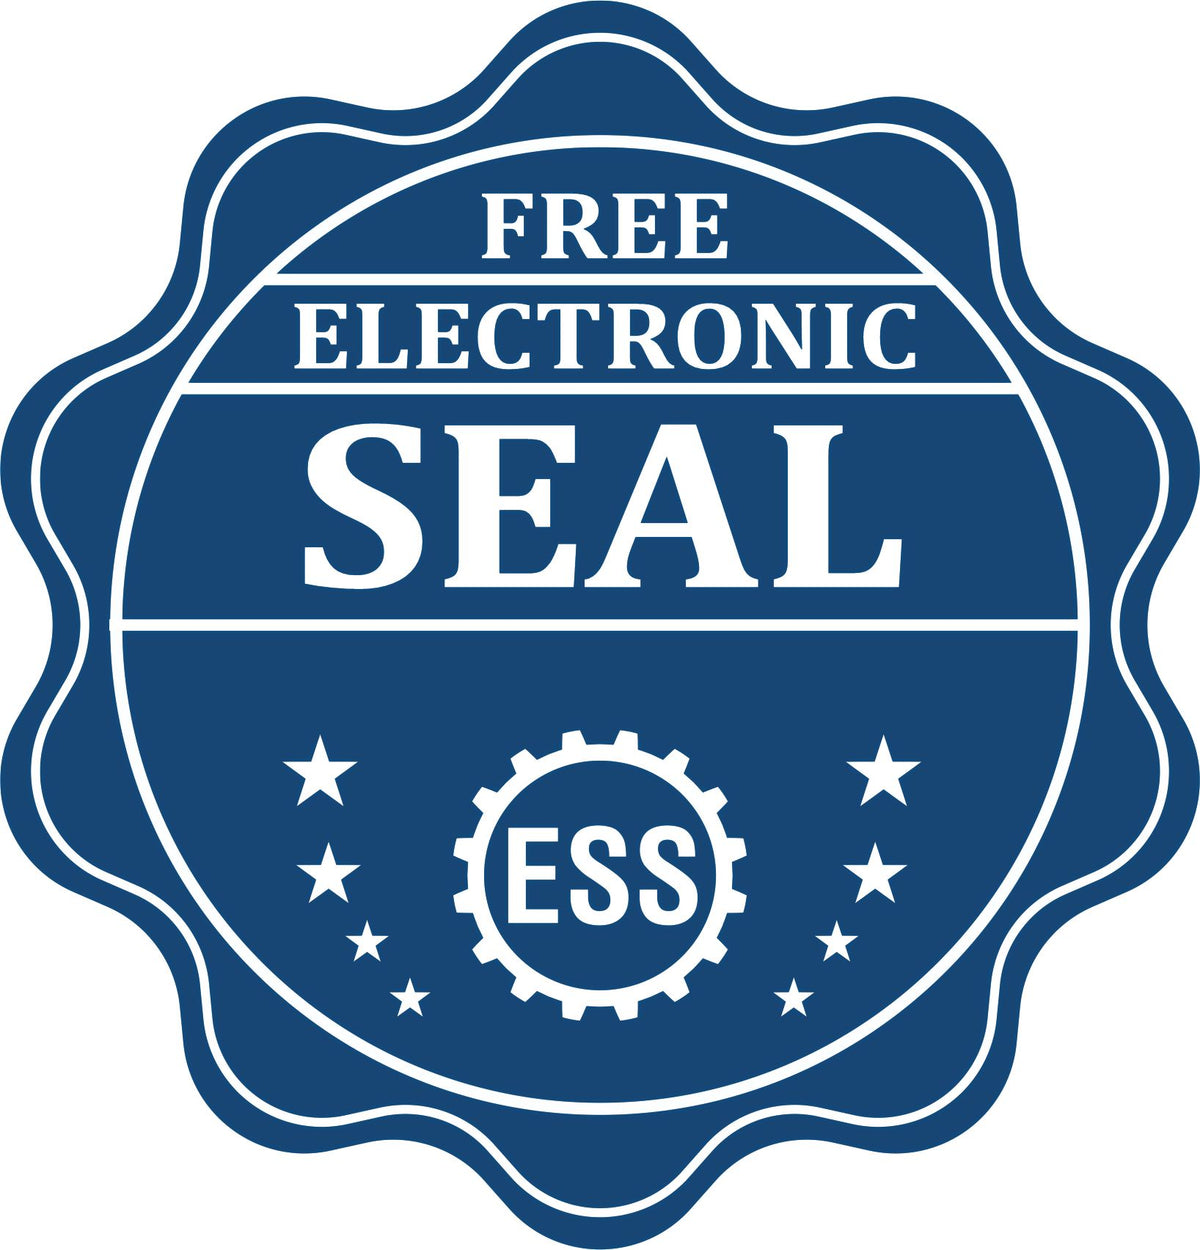 A badge showing a free electronic seal for the Premium MaxLight Pre-Inked Nevada Geology Stamp with stars and the ESS gear on the emblem.